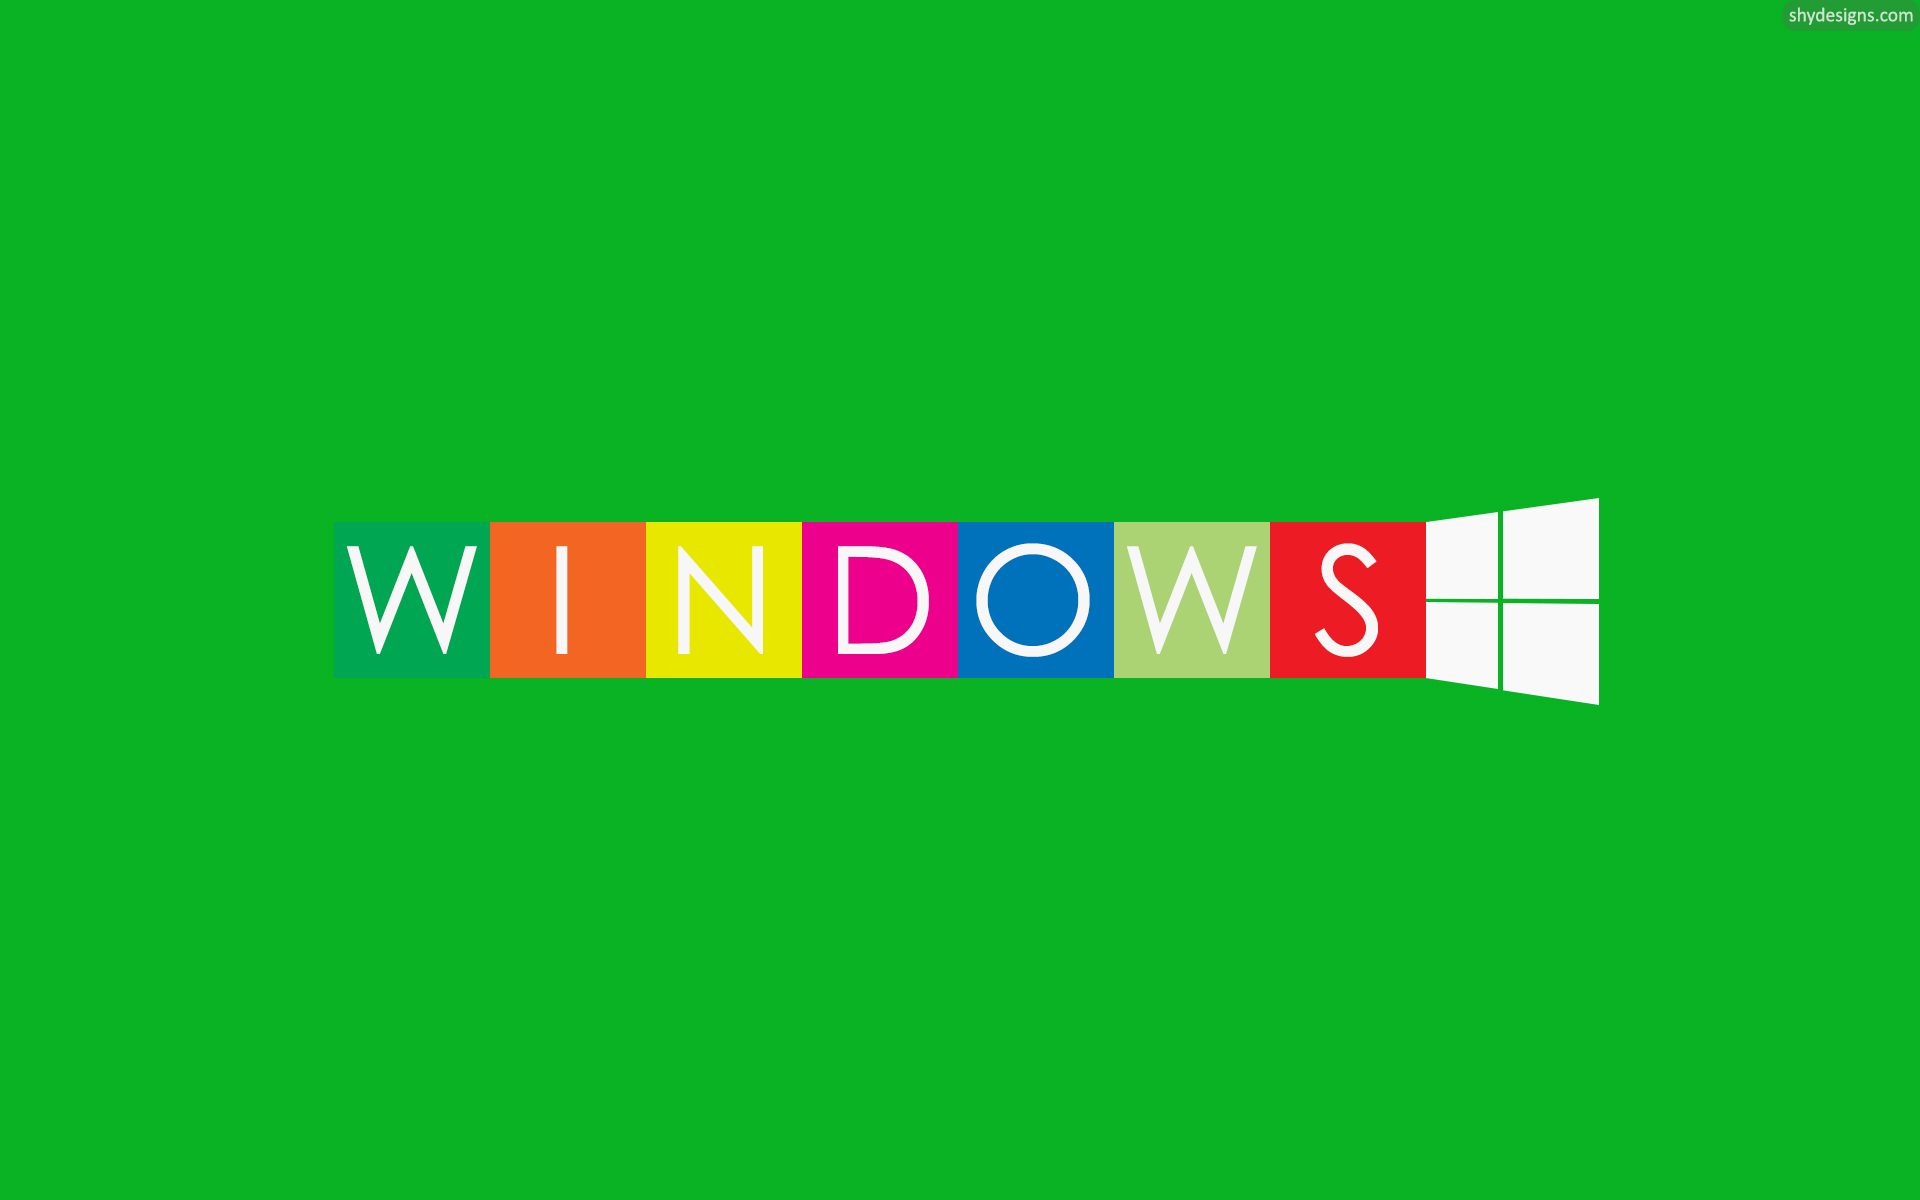 Windows Wallpaper Background Png